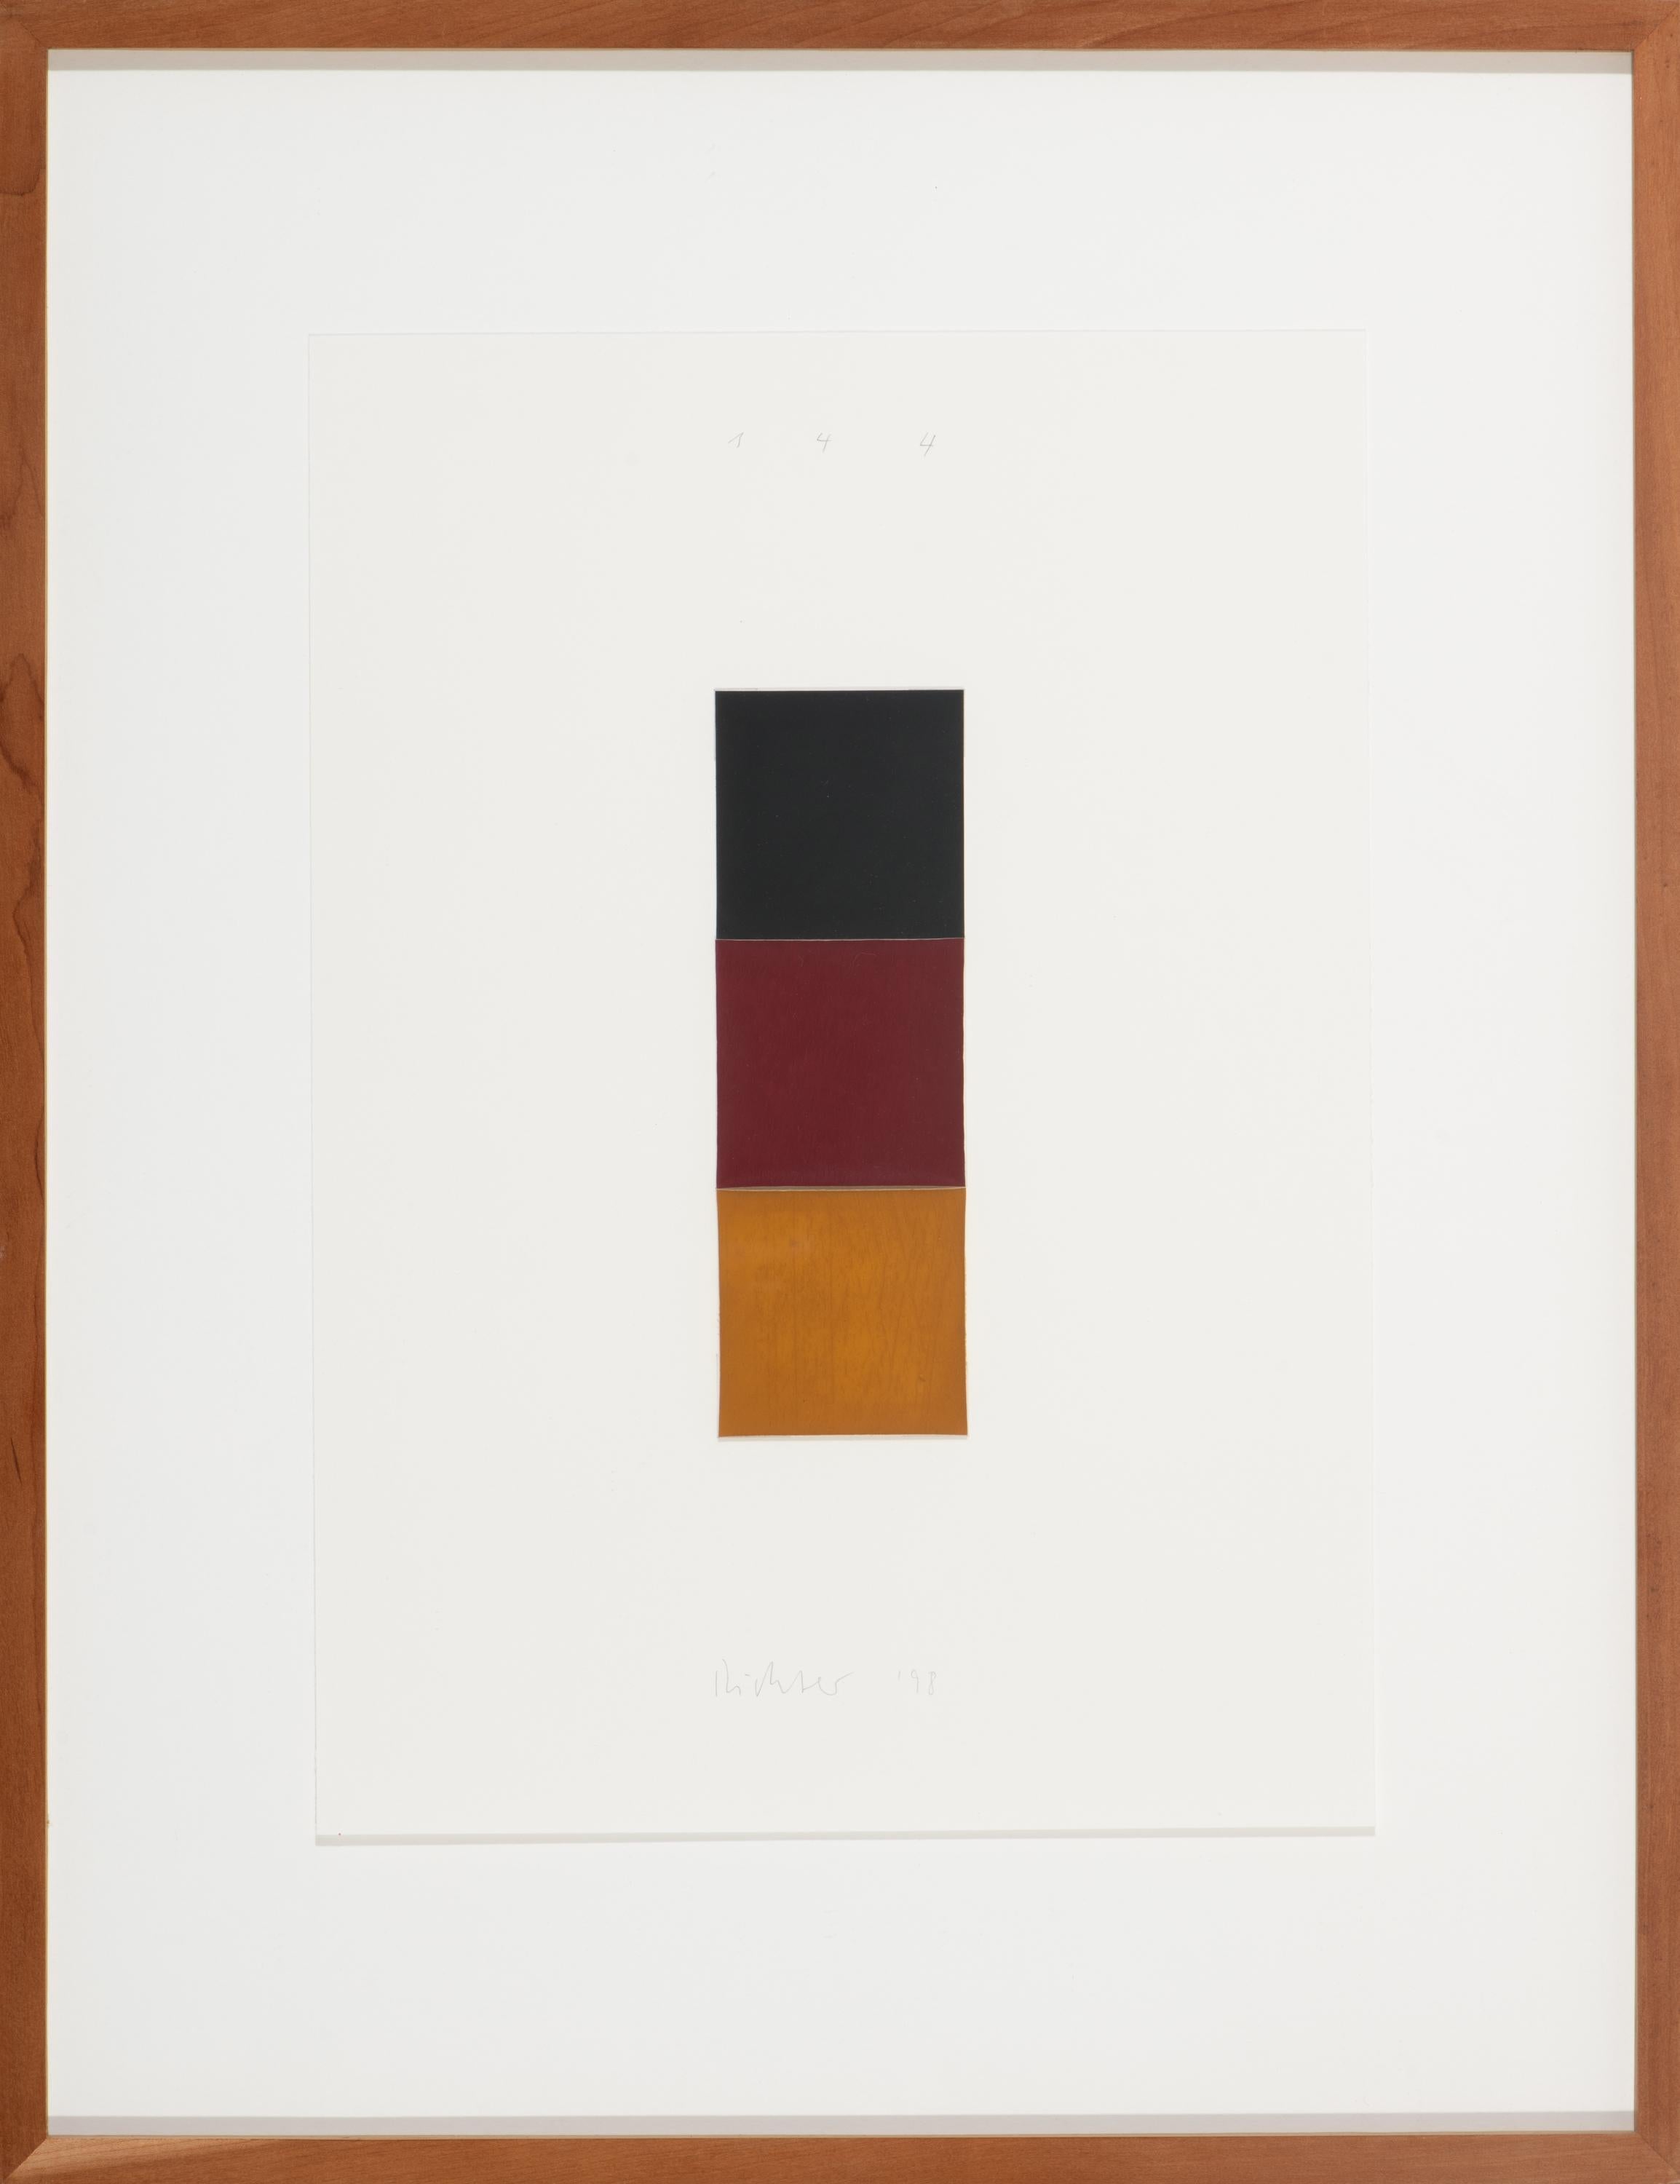 Schwarz, Rot, Gold I [Black, Red, Gold I] -- Oil Paint, Collage Art by Richter - Print by Gerhard Richter